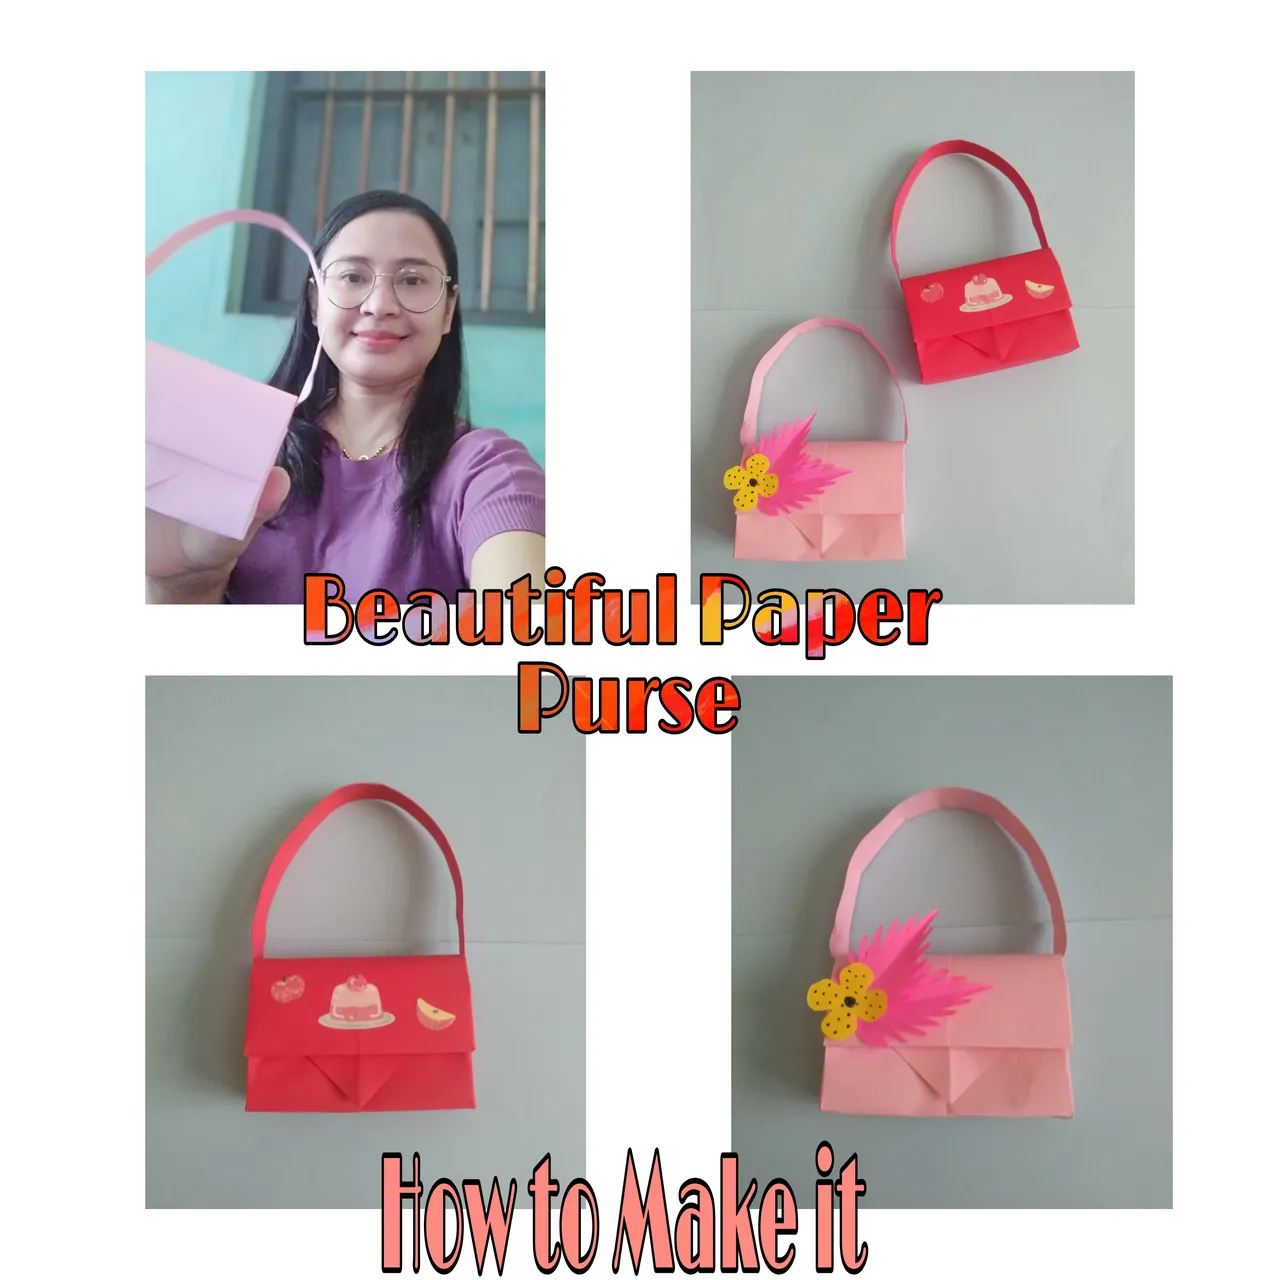 How to Make an Origami Purse! | Origami easy, Origami, Origami for beginners